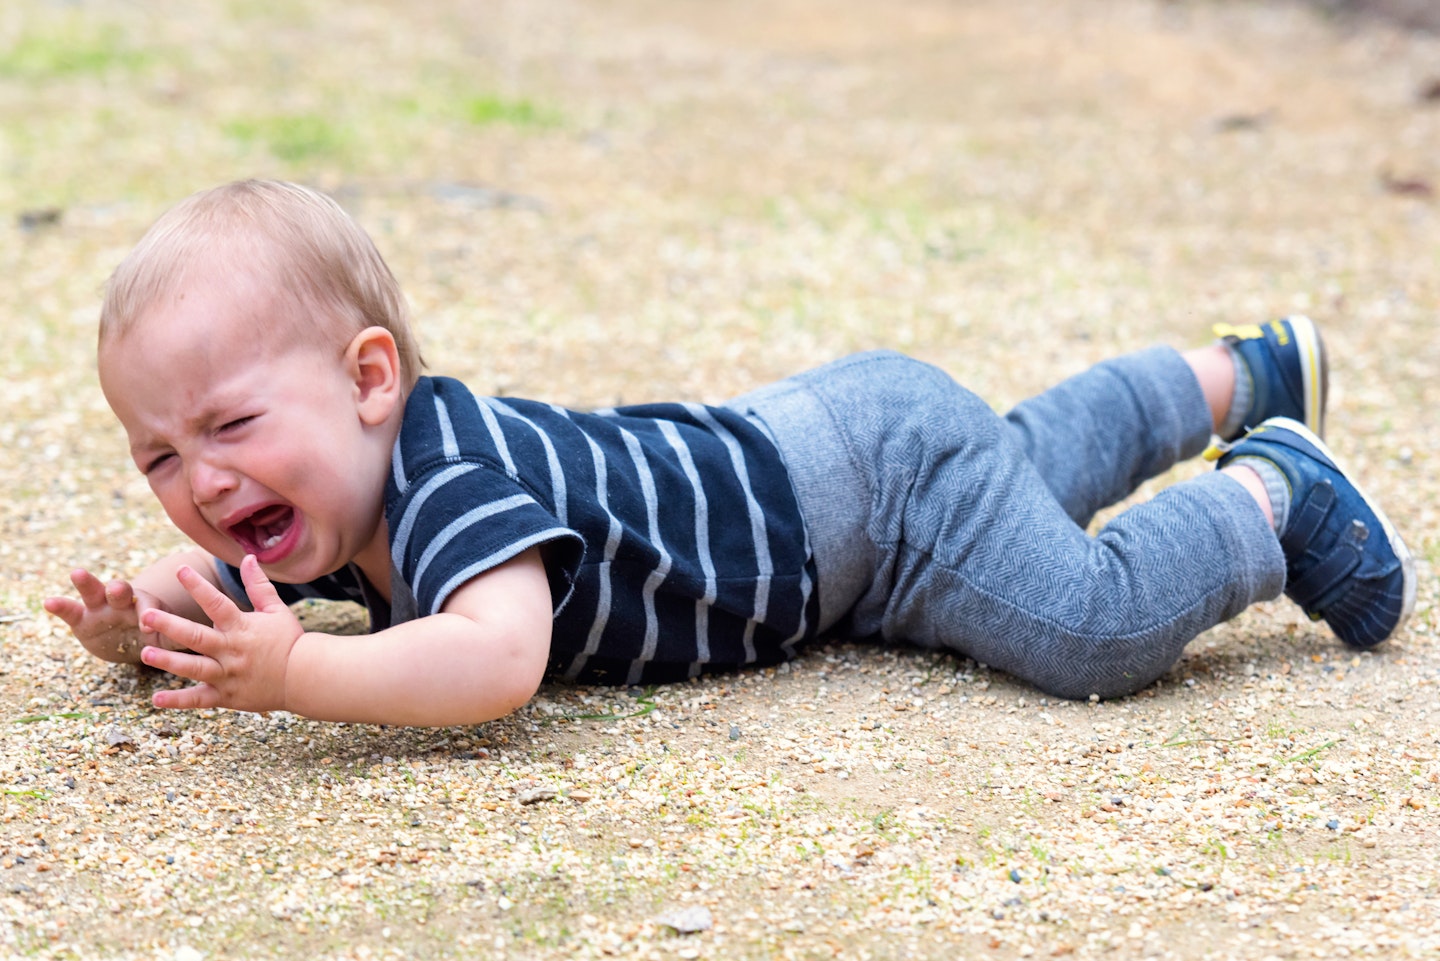 Why Do Babies Avoid Grass? Their Nervous Systems Aren't Ready.